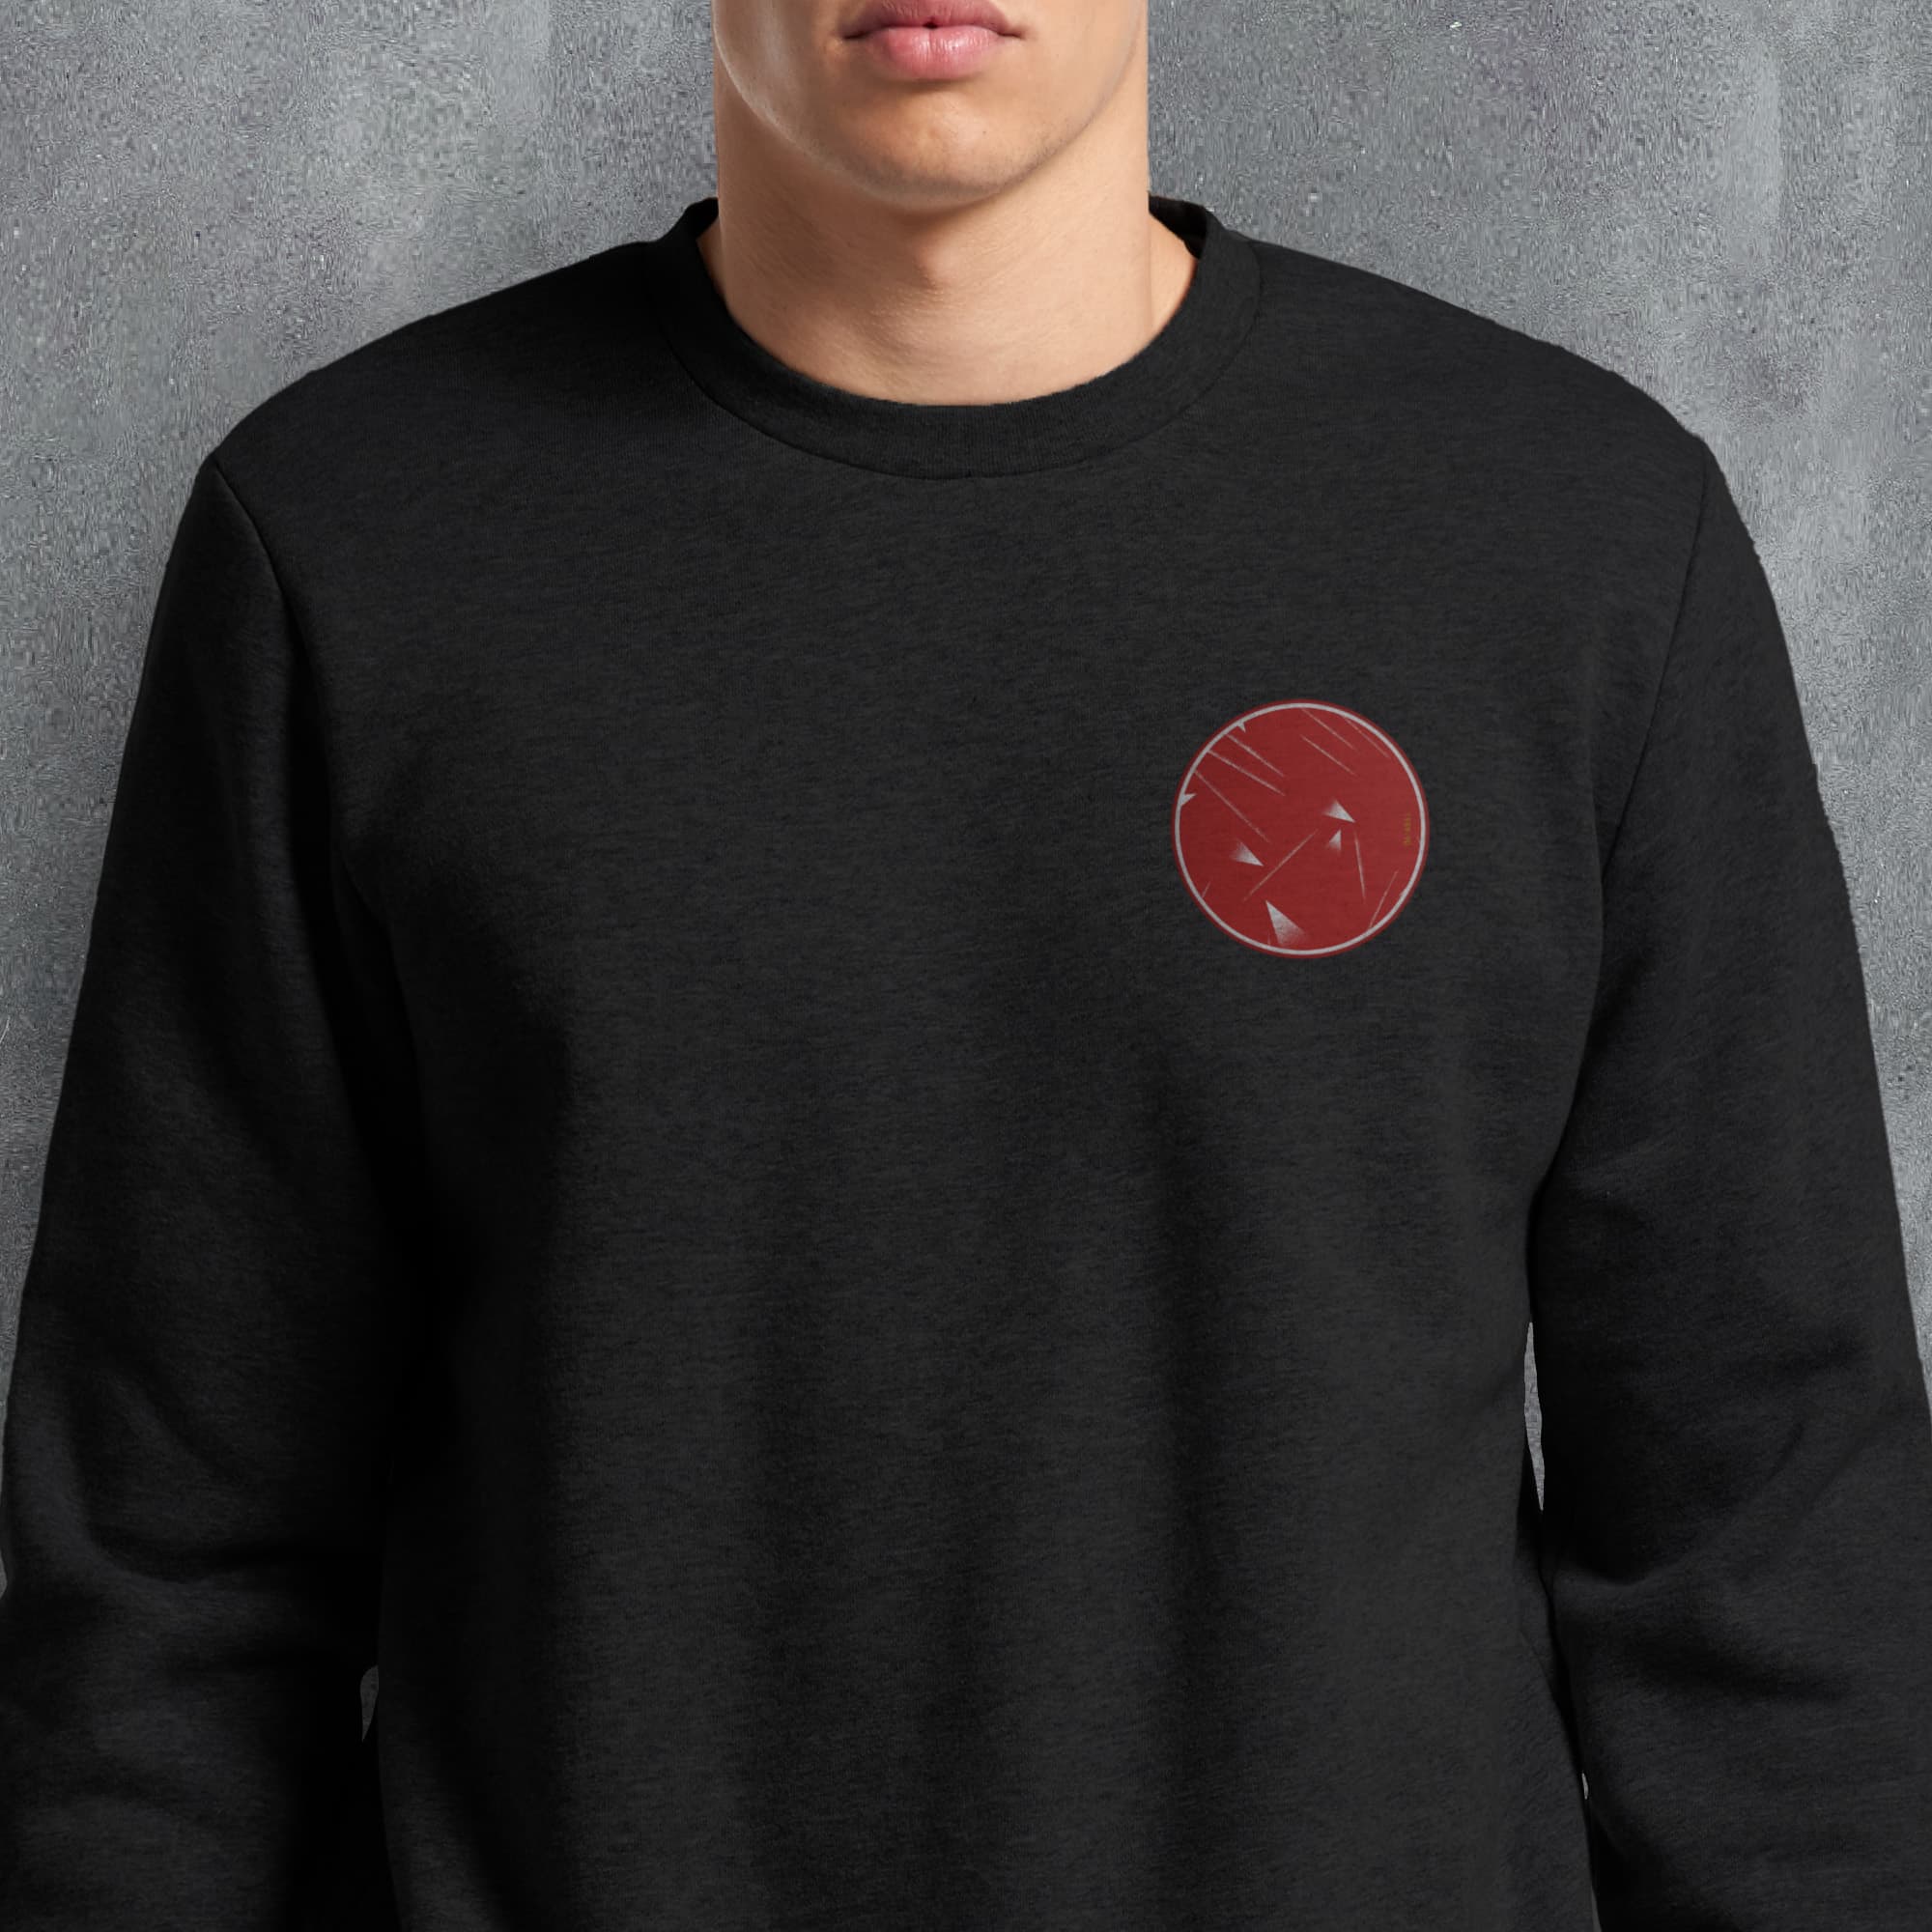 a man wearing a black sweatshirt with a red smiley face on it